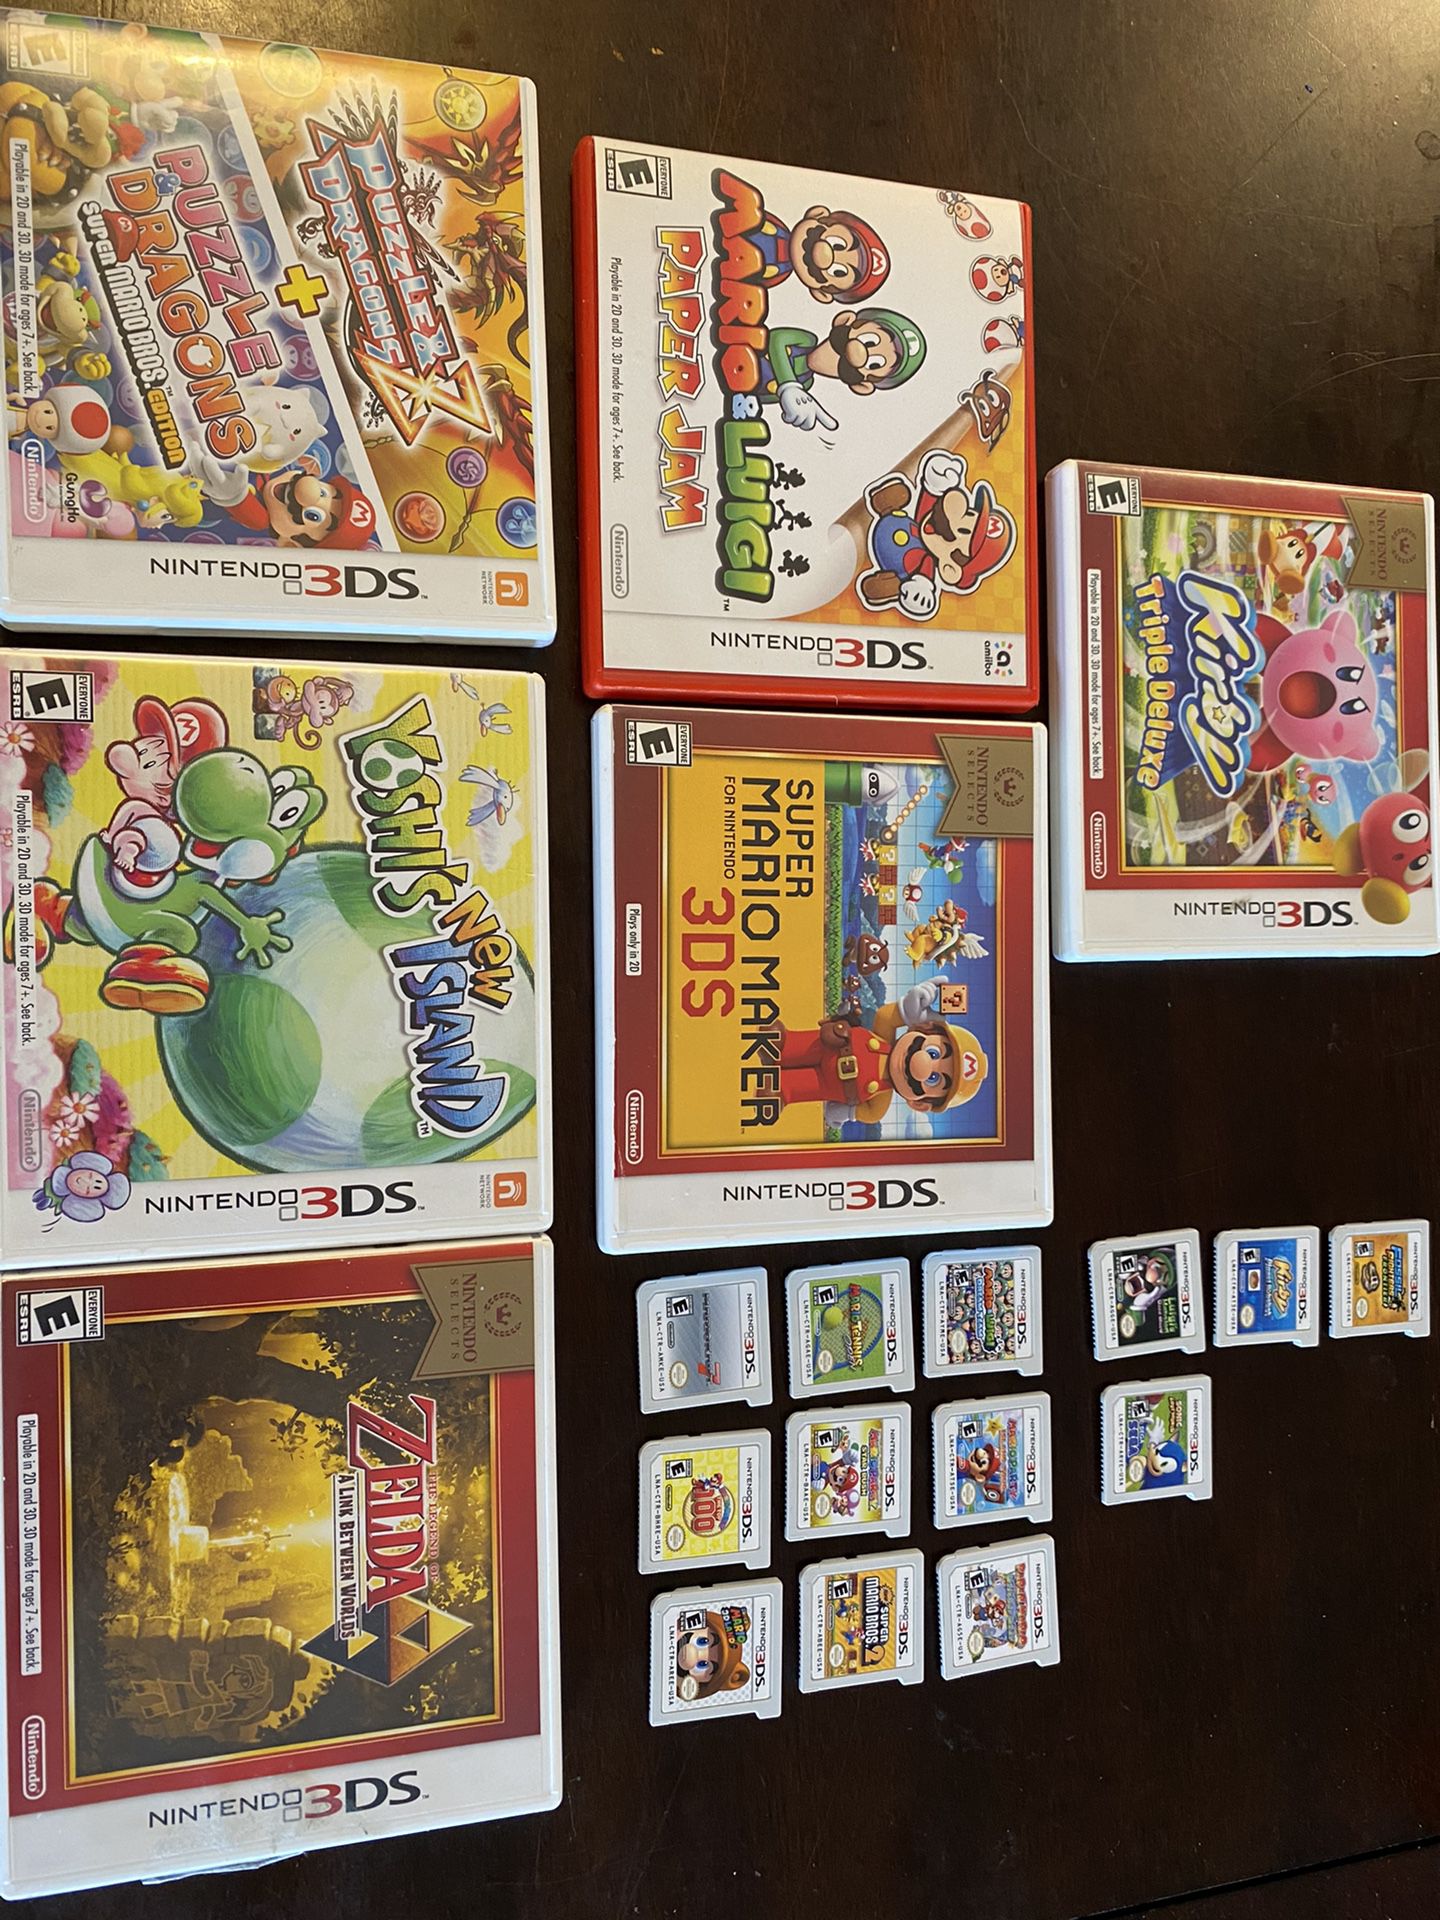 Nintendo 3DS games priced individually below